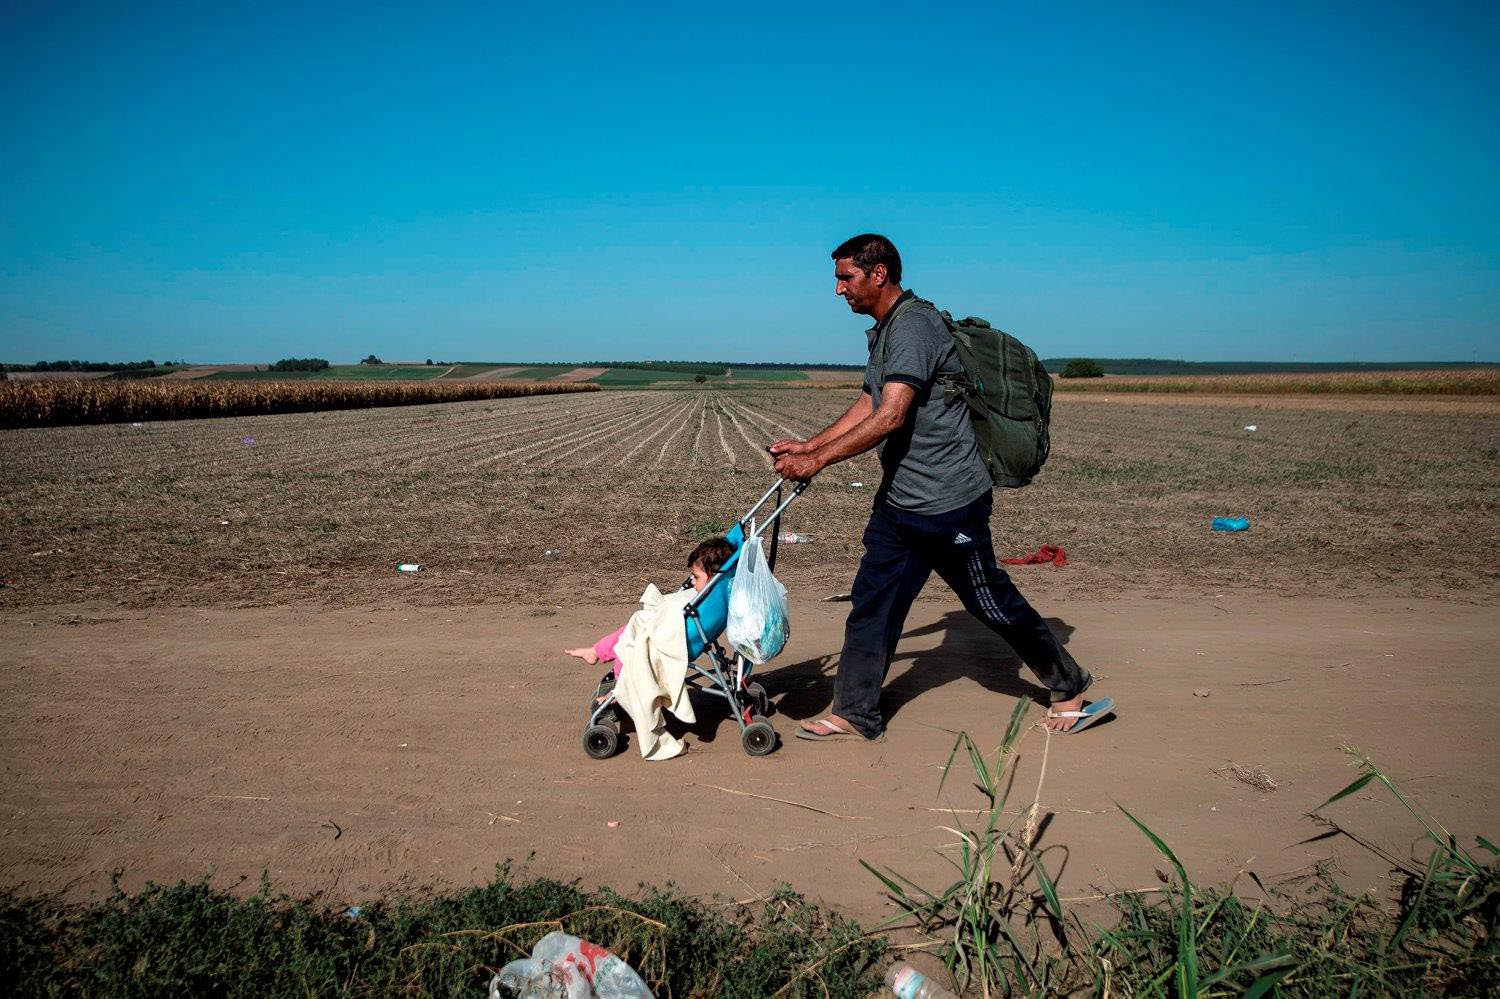 A refugee wheels his child in a pushchair on a dirt road towards the border between Croatia and Serbia, near the western-Serbia town of Sid, on 18 September 2015.